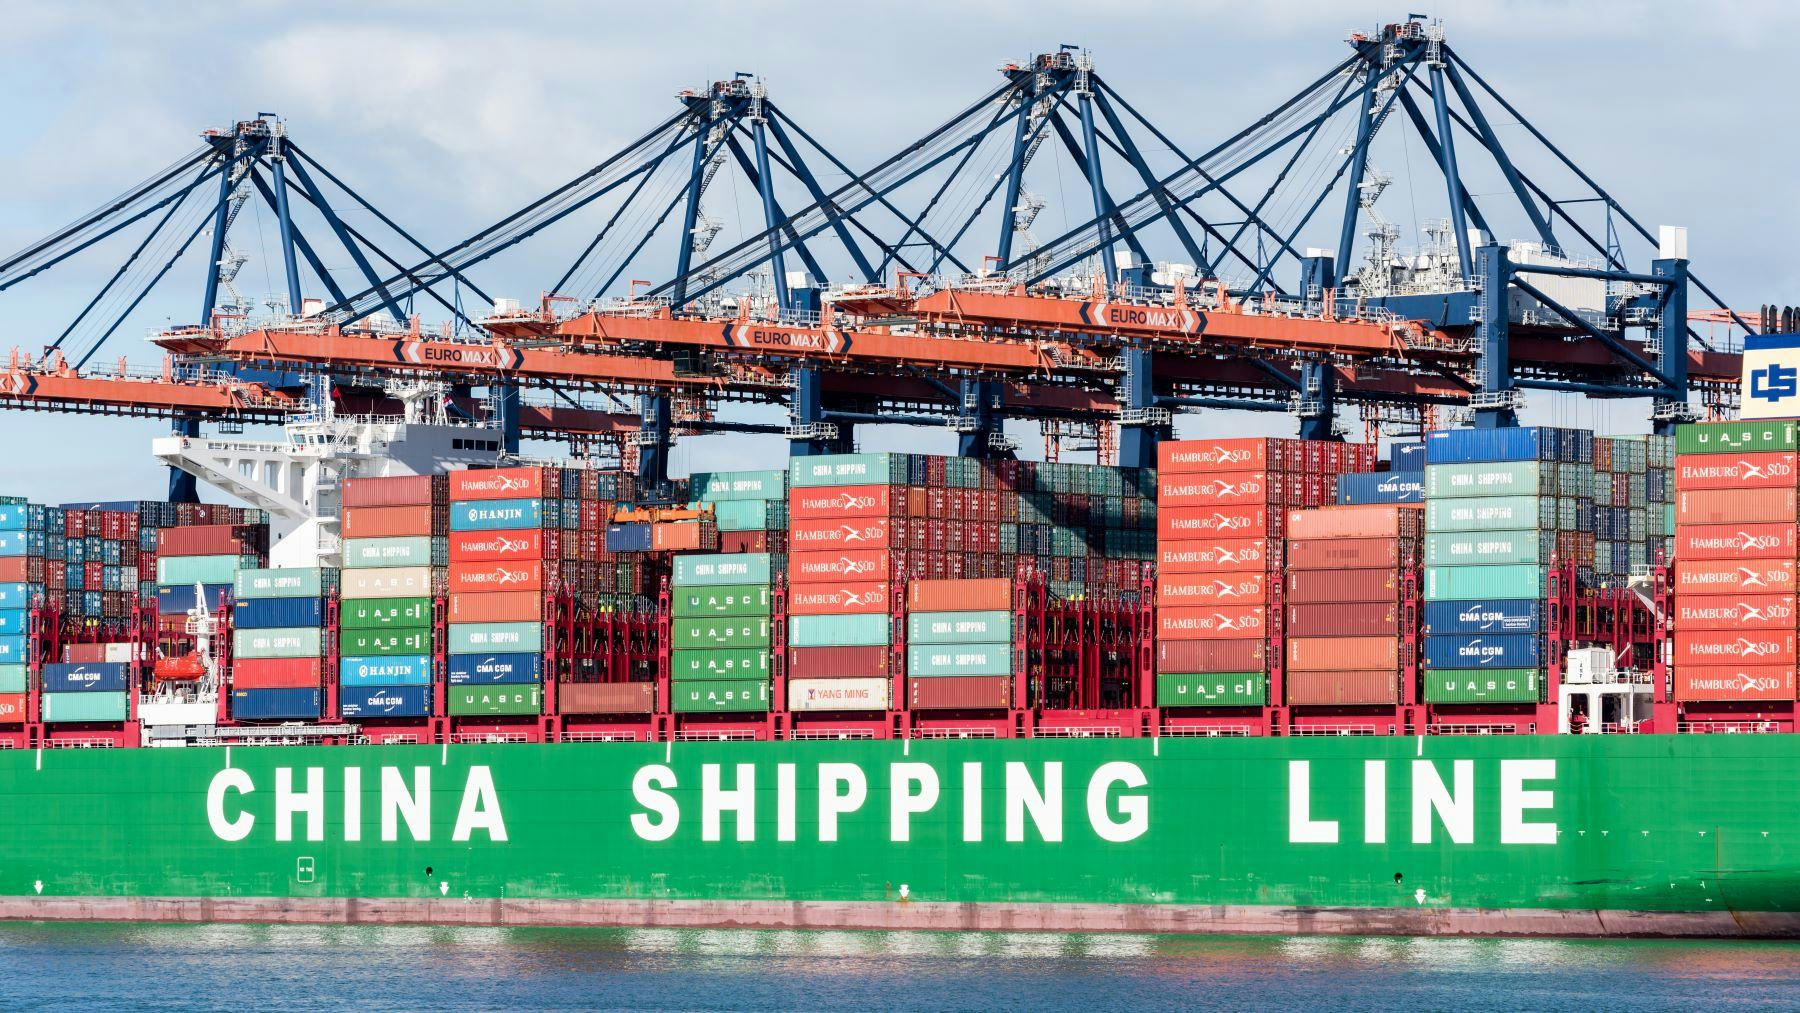 The new exporter status of the two Chinese companies came into effect on Wednesday 30 November. – Photo Shutterstock